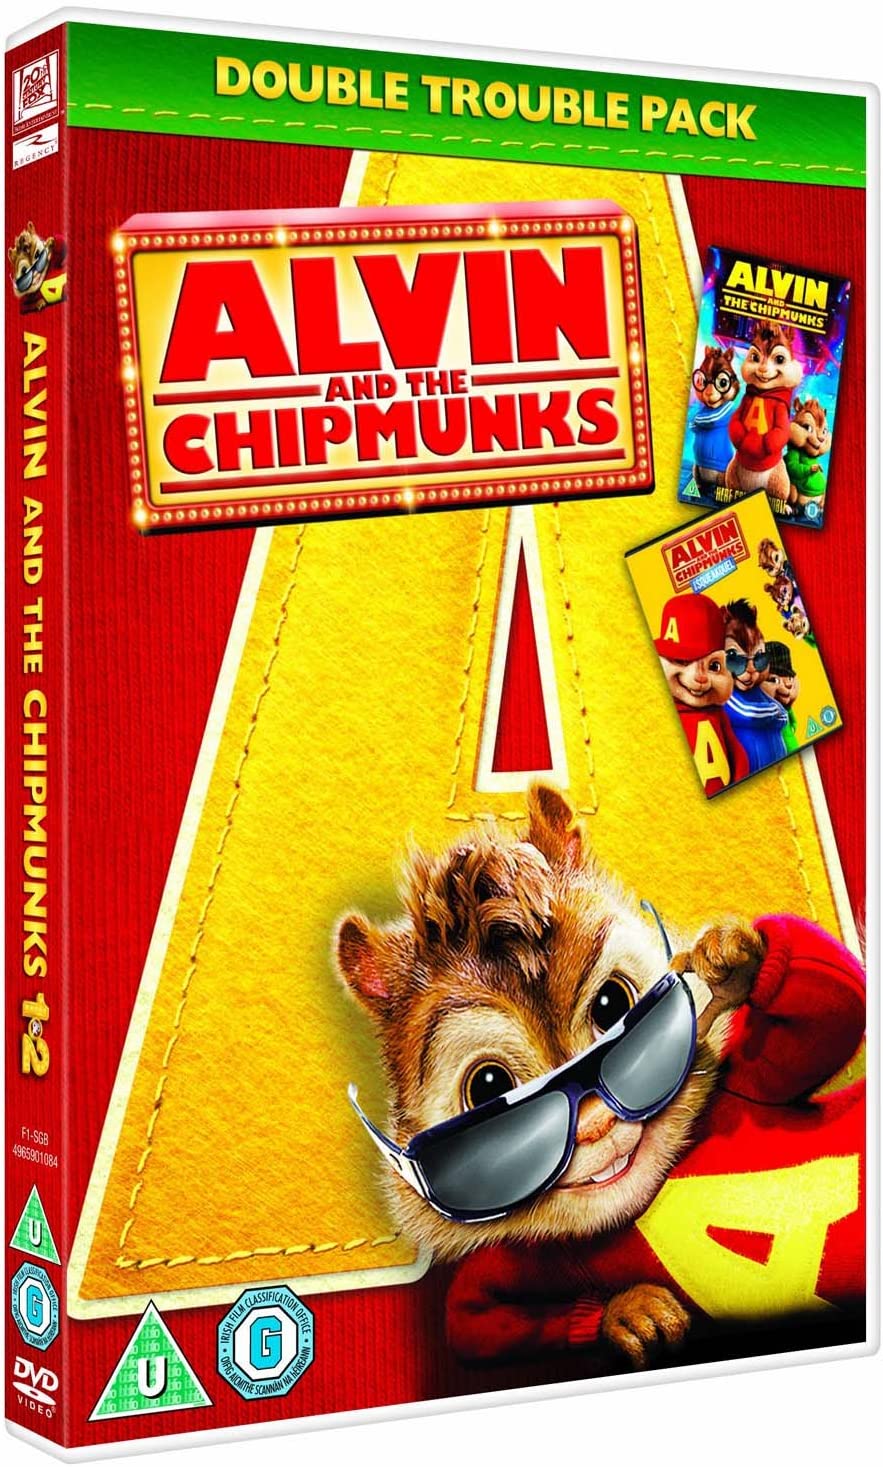 Alvin und die Chipmunks / Alvin und die Chipmunks 2: The Squeakquel Double Pack [2007]